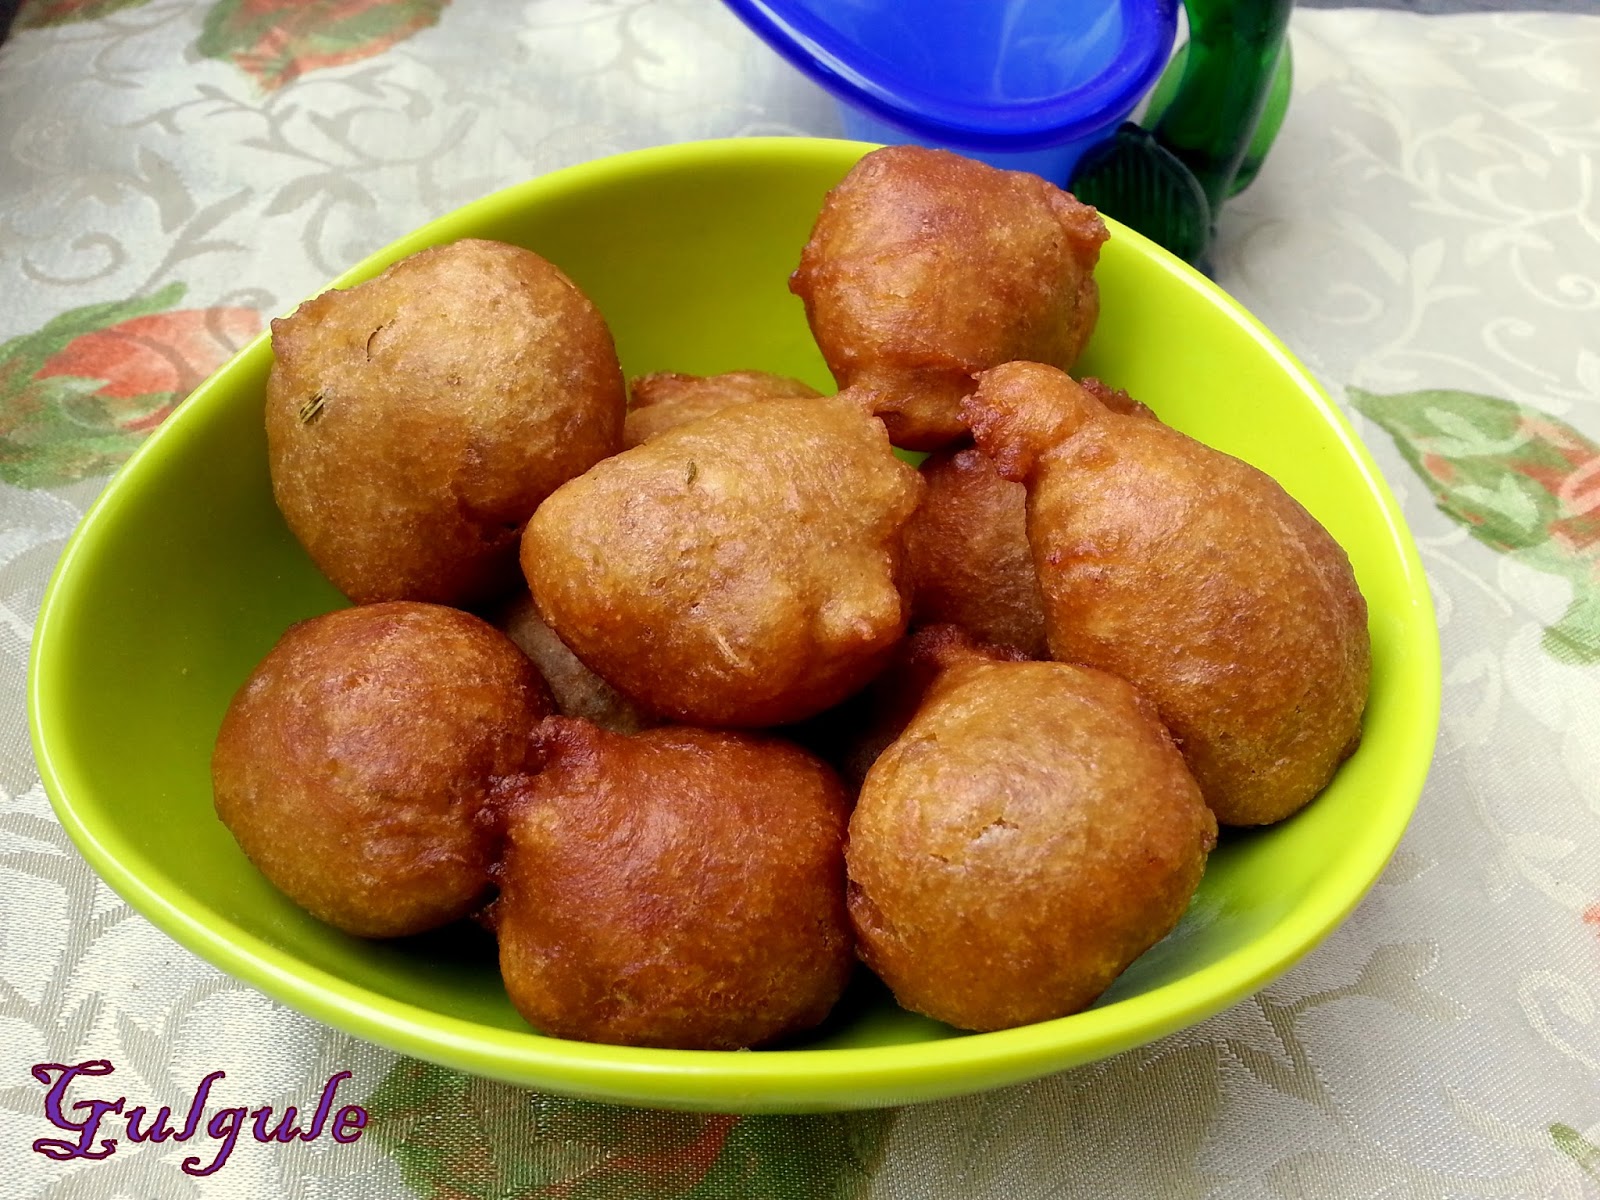 Gulgule Recipe: Easy and Delicious Homemade Delights